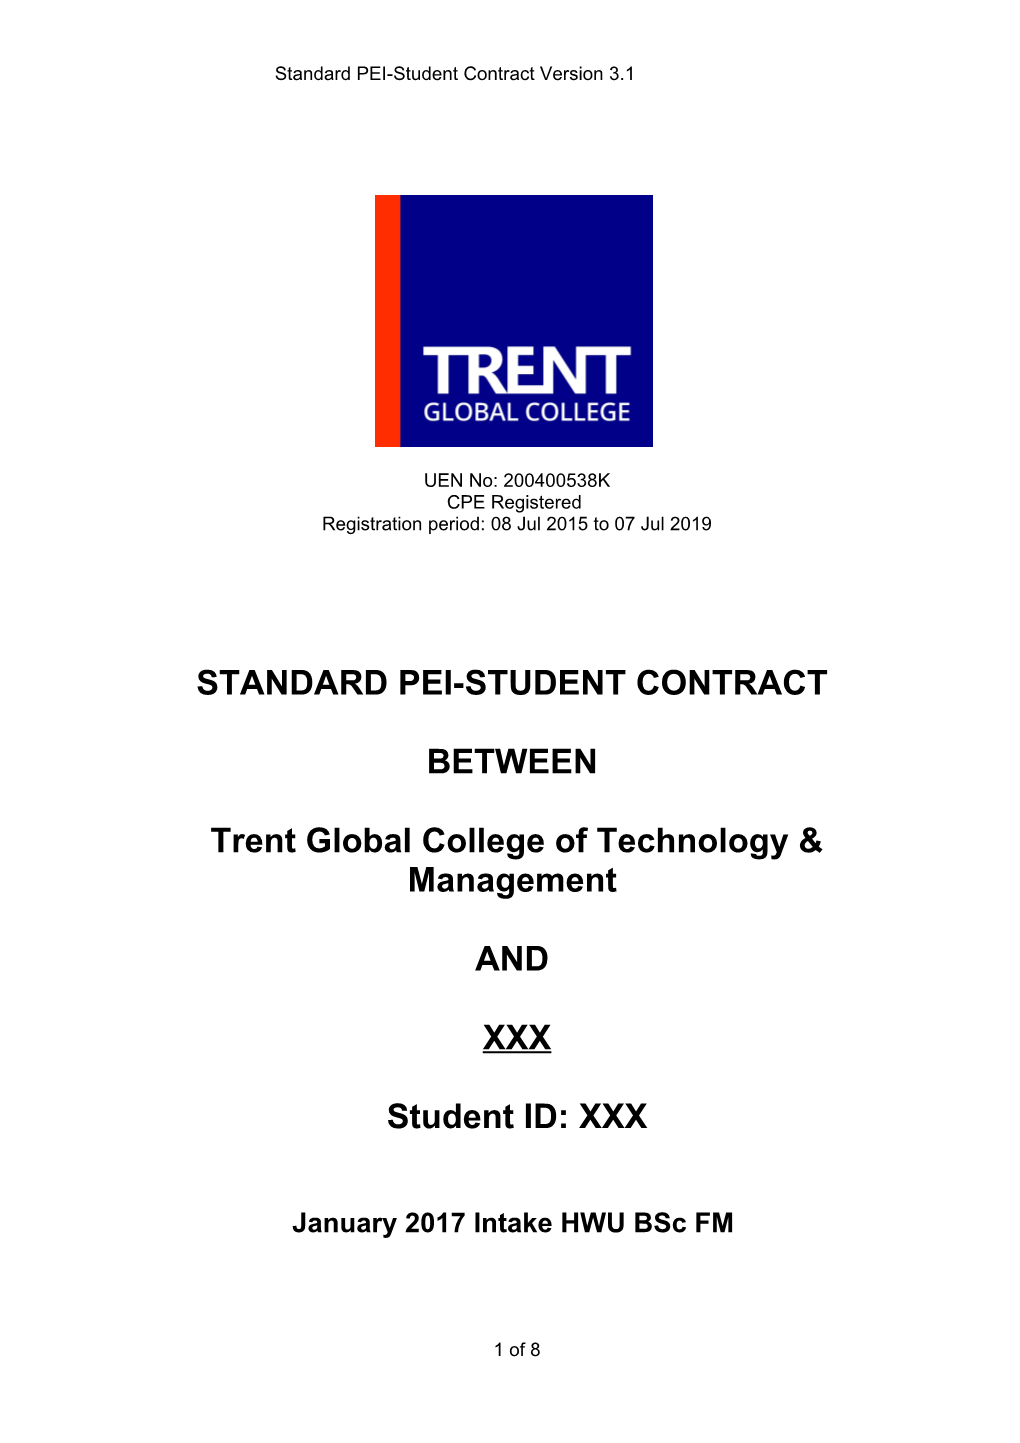 Standard PEI-Student Contract Version 3.1